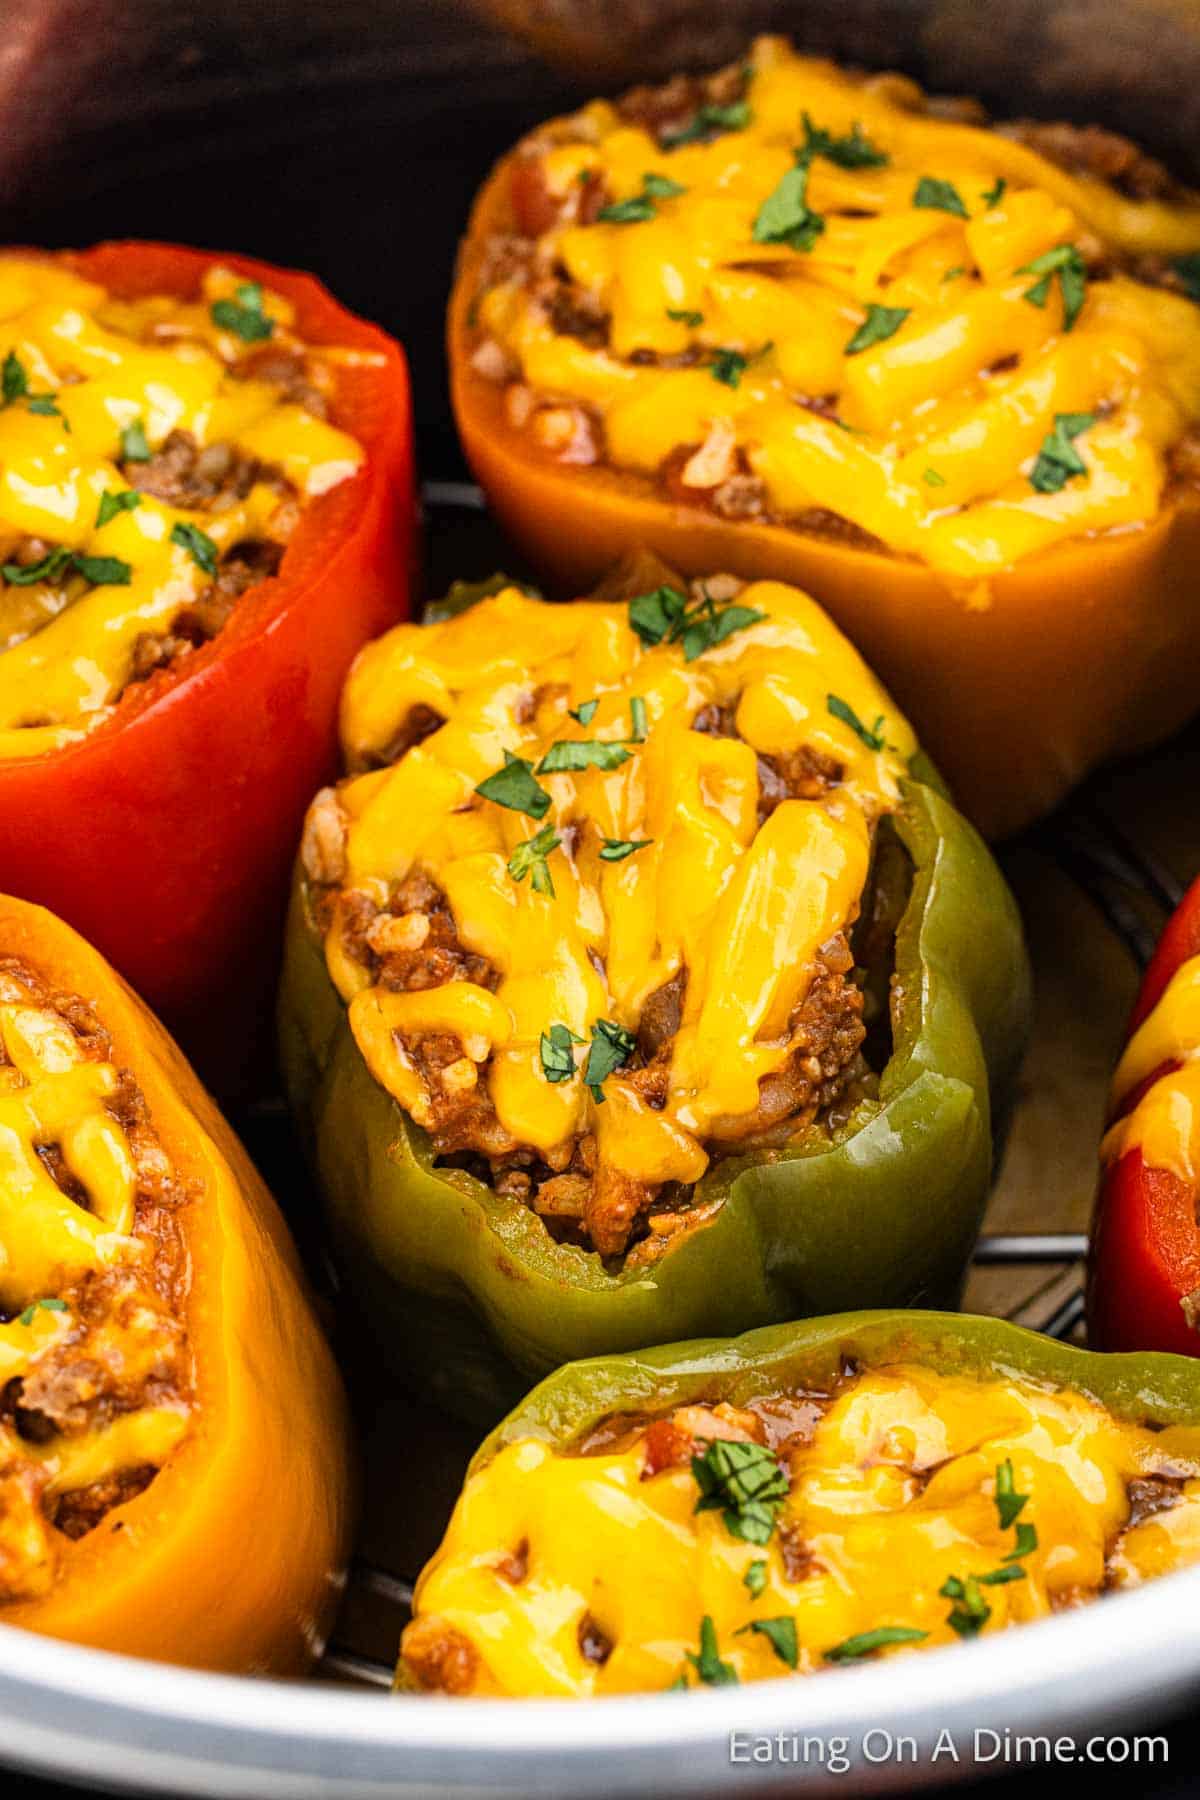 Stuffed peppers in instant pot stuffed with ground beef mixture and topped with melted cheese